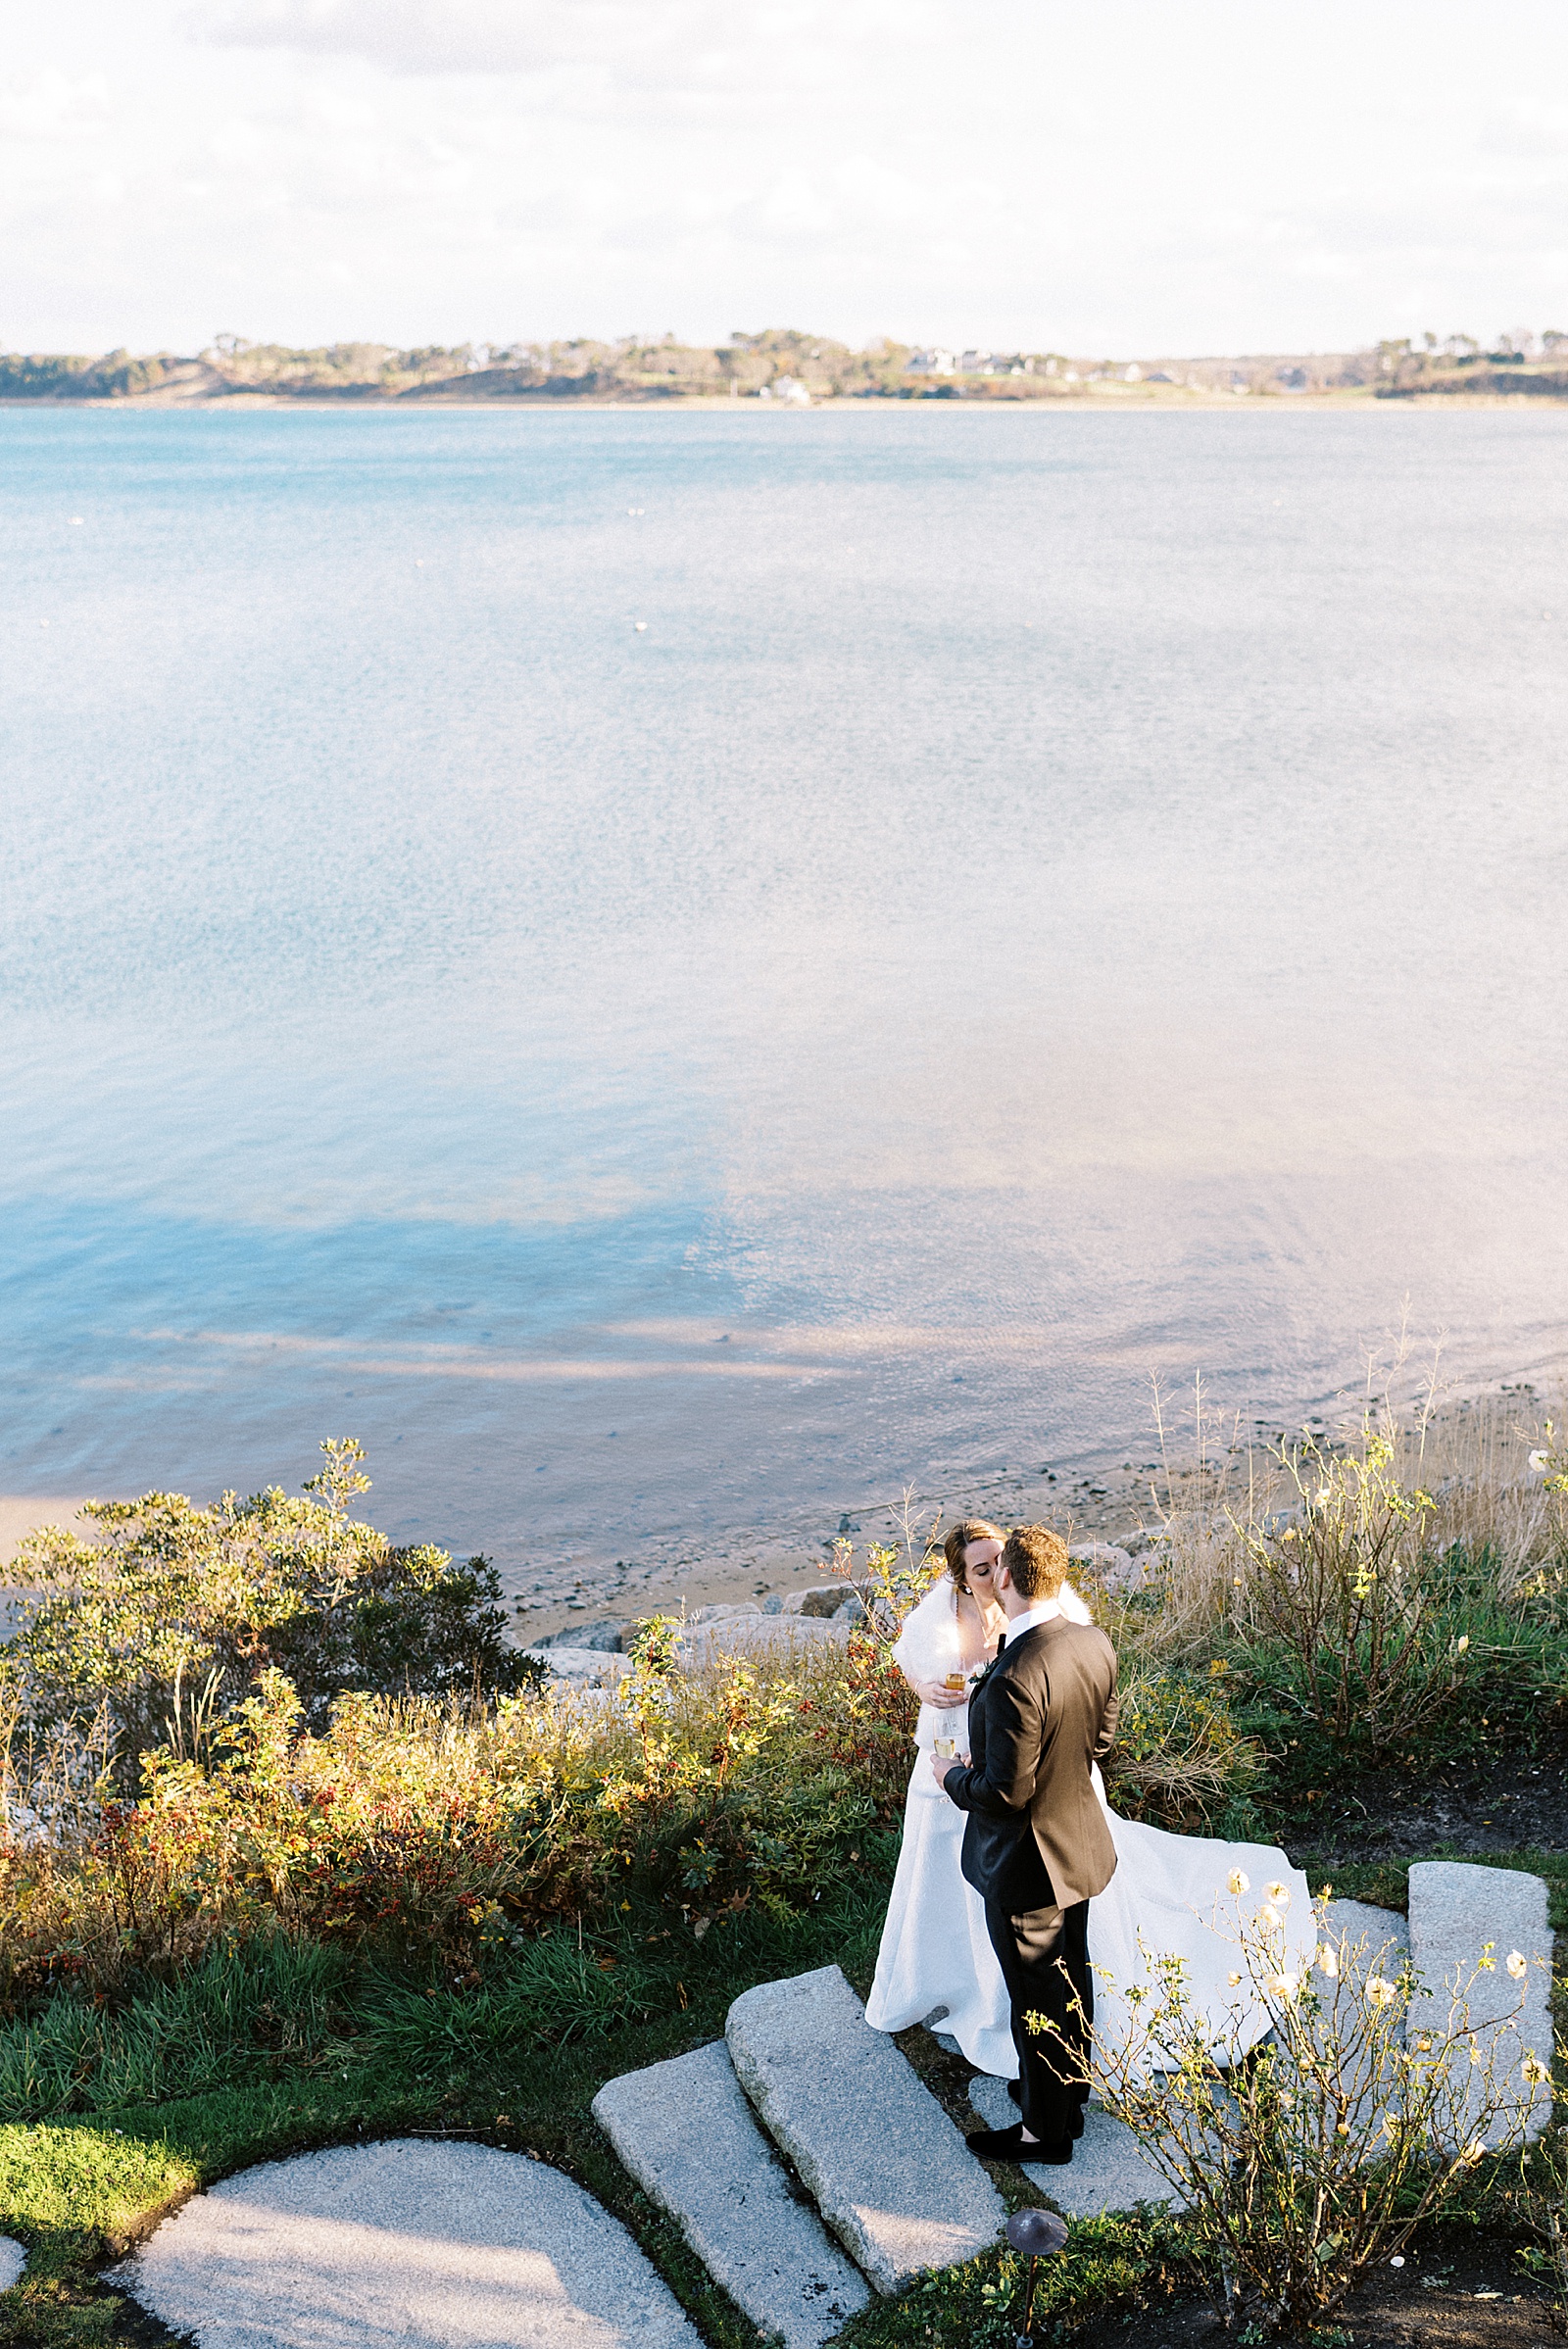 Couple kissing by the ocean on their wedding day by New York Photographer, Lynne Reznick